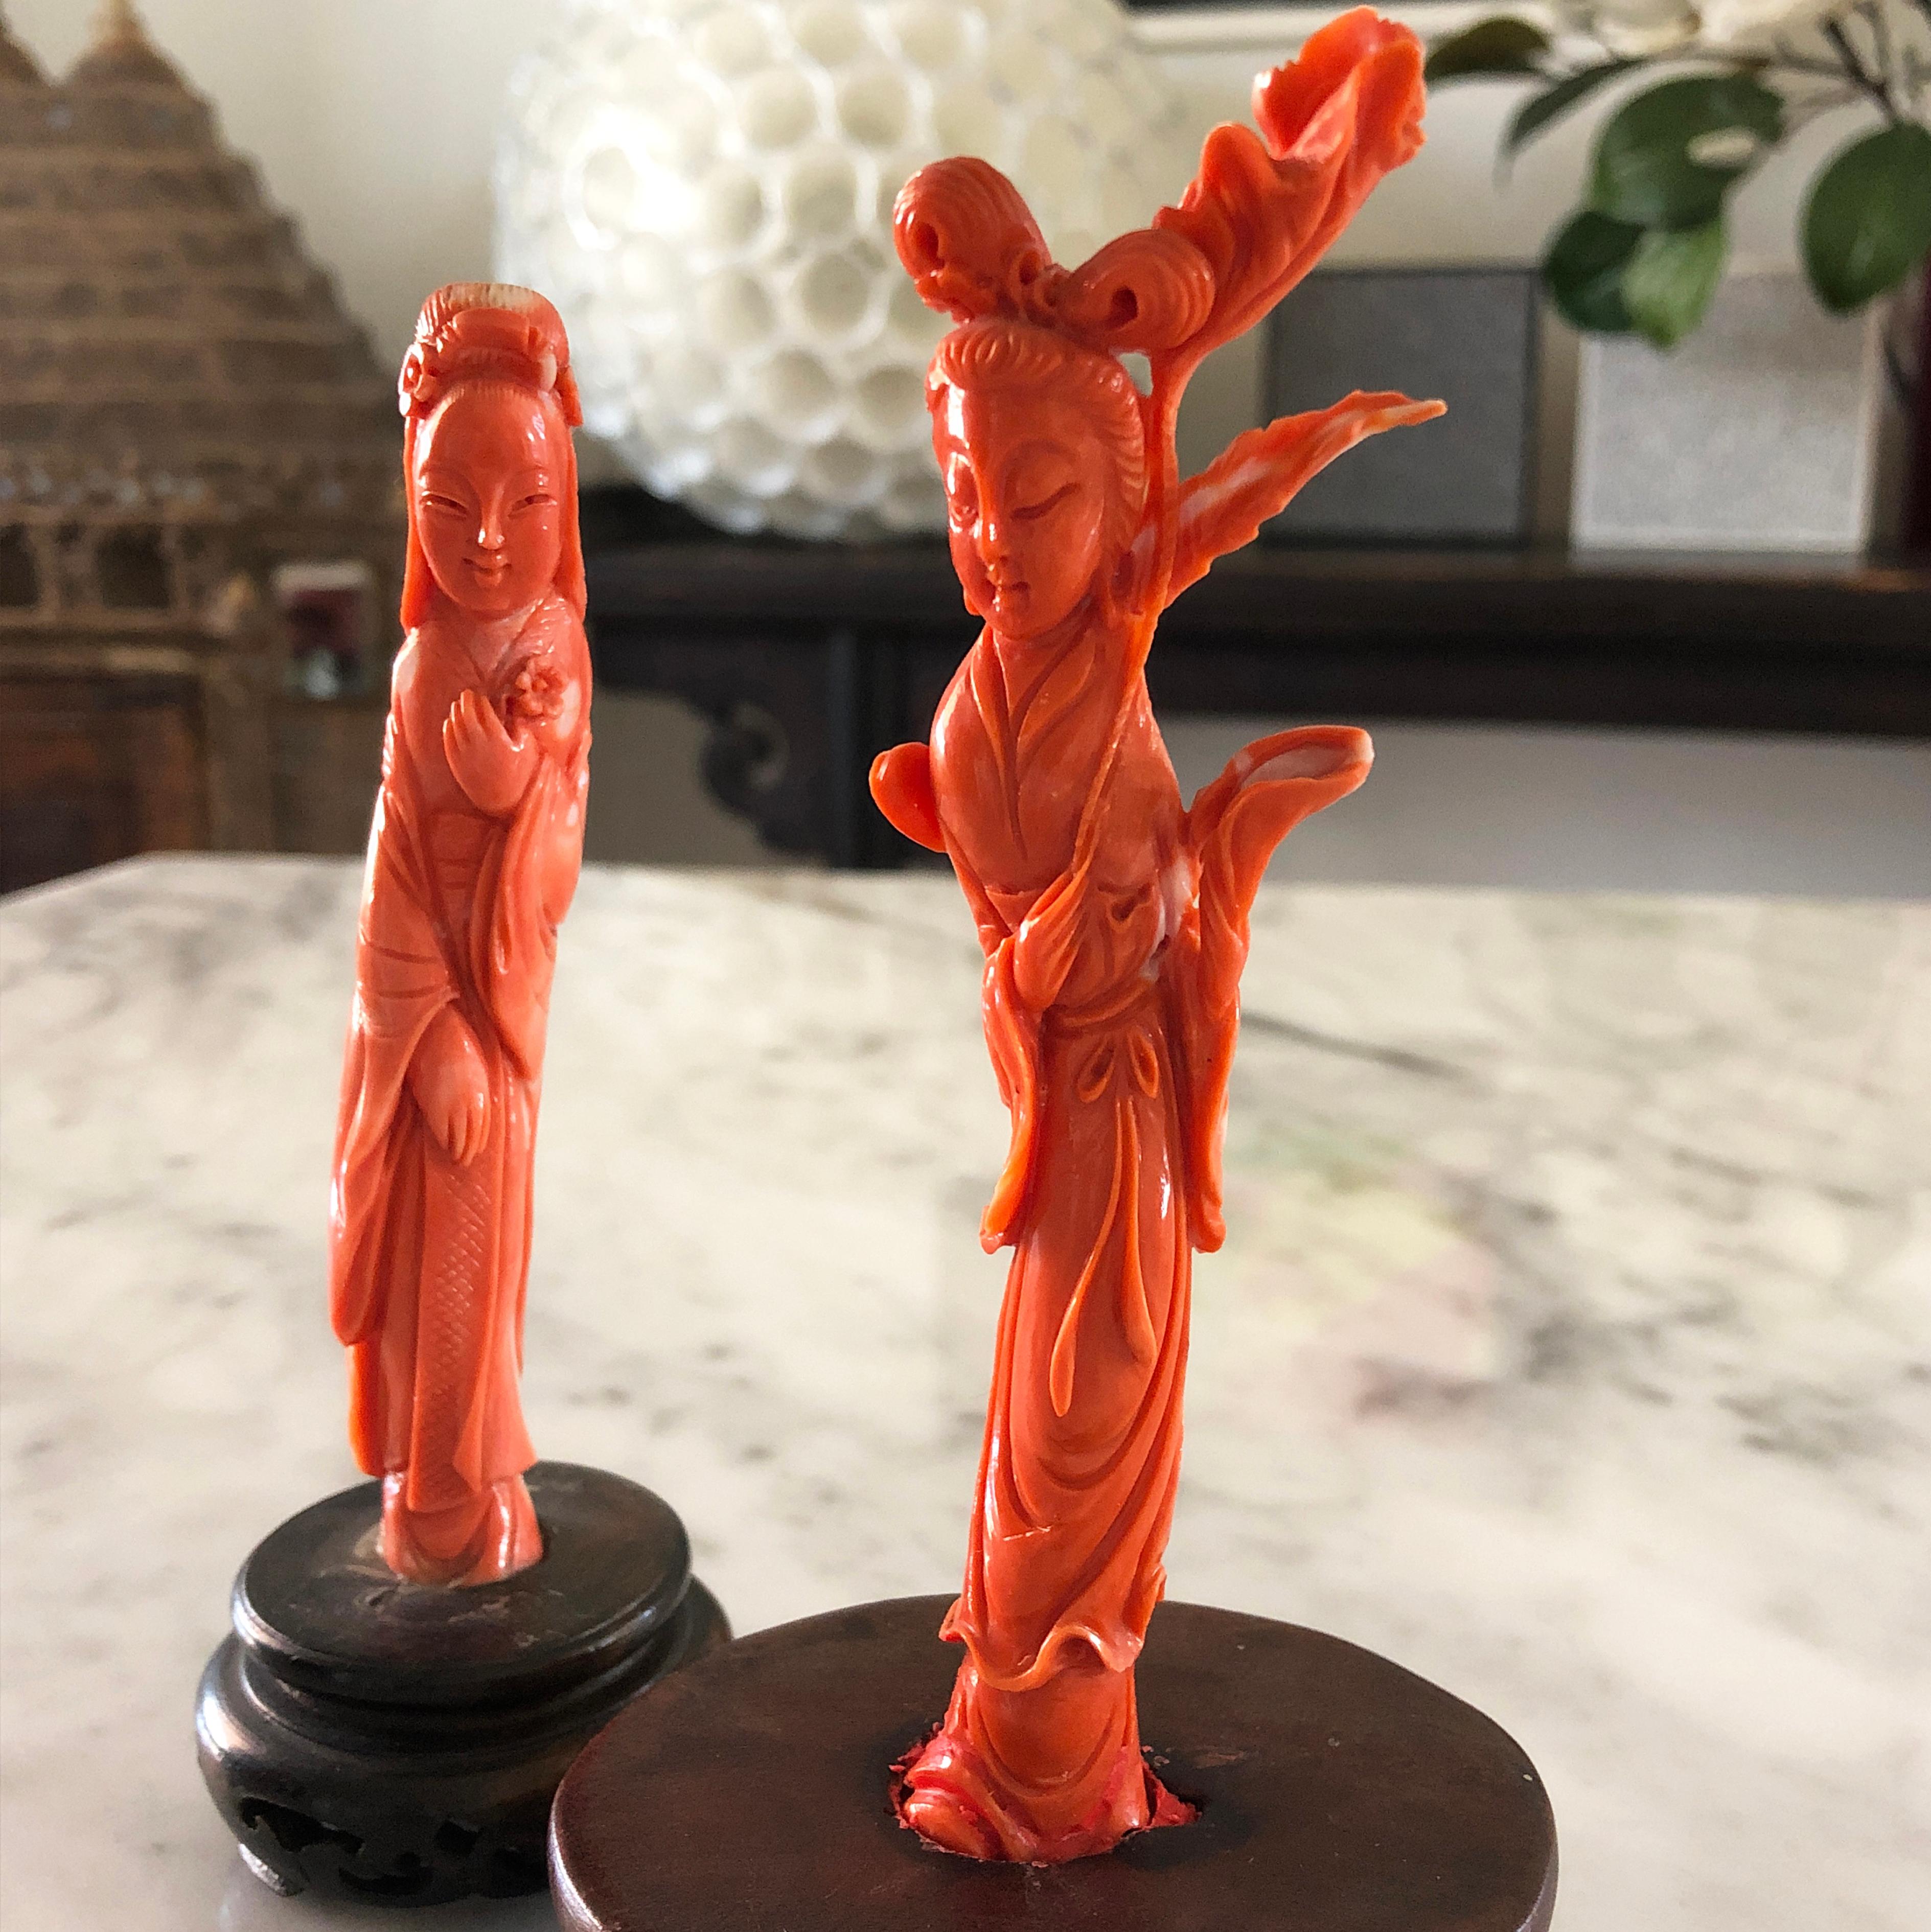 One-of-a-kind, Original 1930, Chinese Export Natural Midway Coral Two Dames Sculptures. Hand Carving and Engraving Work is Beautiffully Crisp and Detailed.
This Unique Set is still in excellent conditions.
With a wood fitted stand and chinese